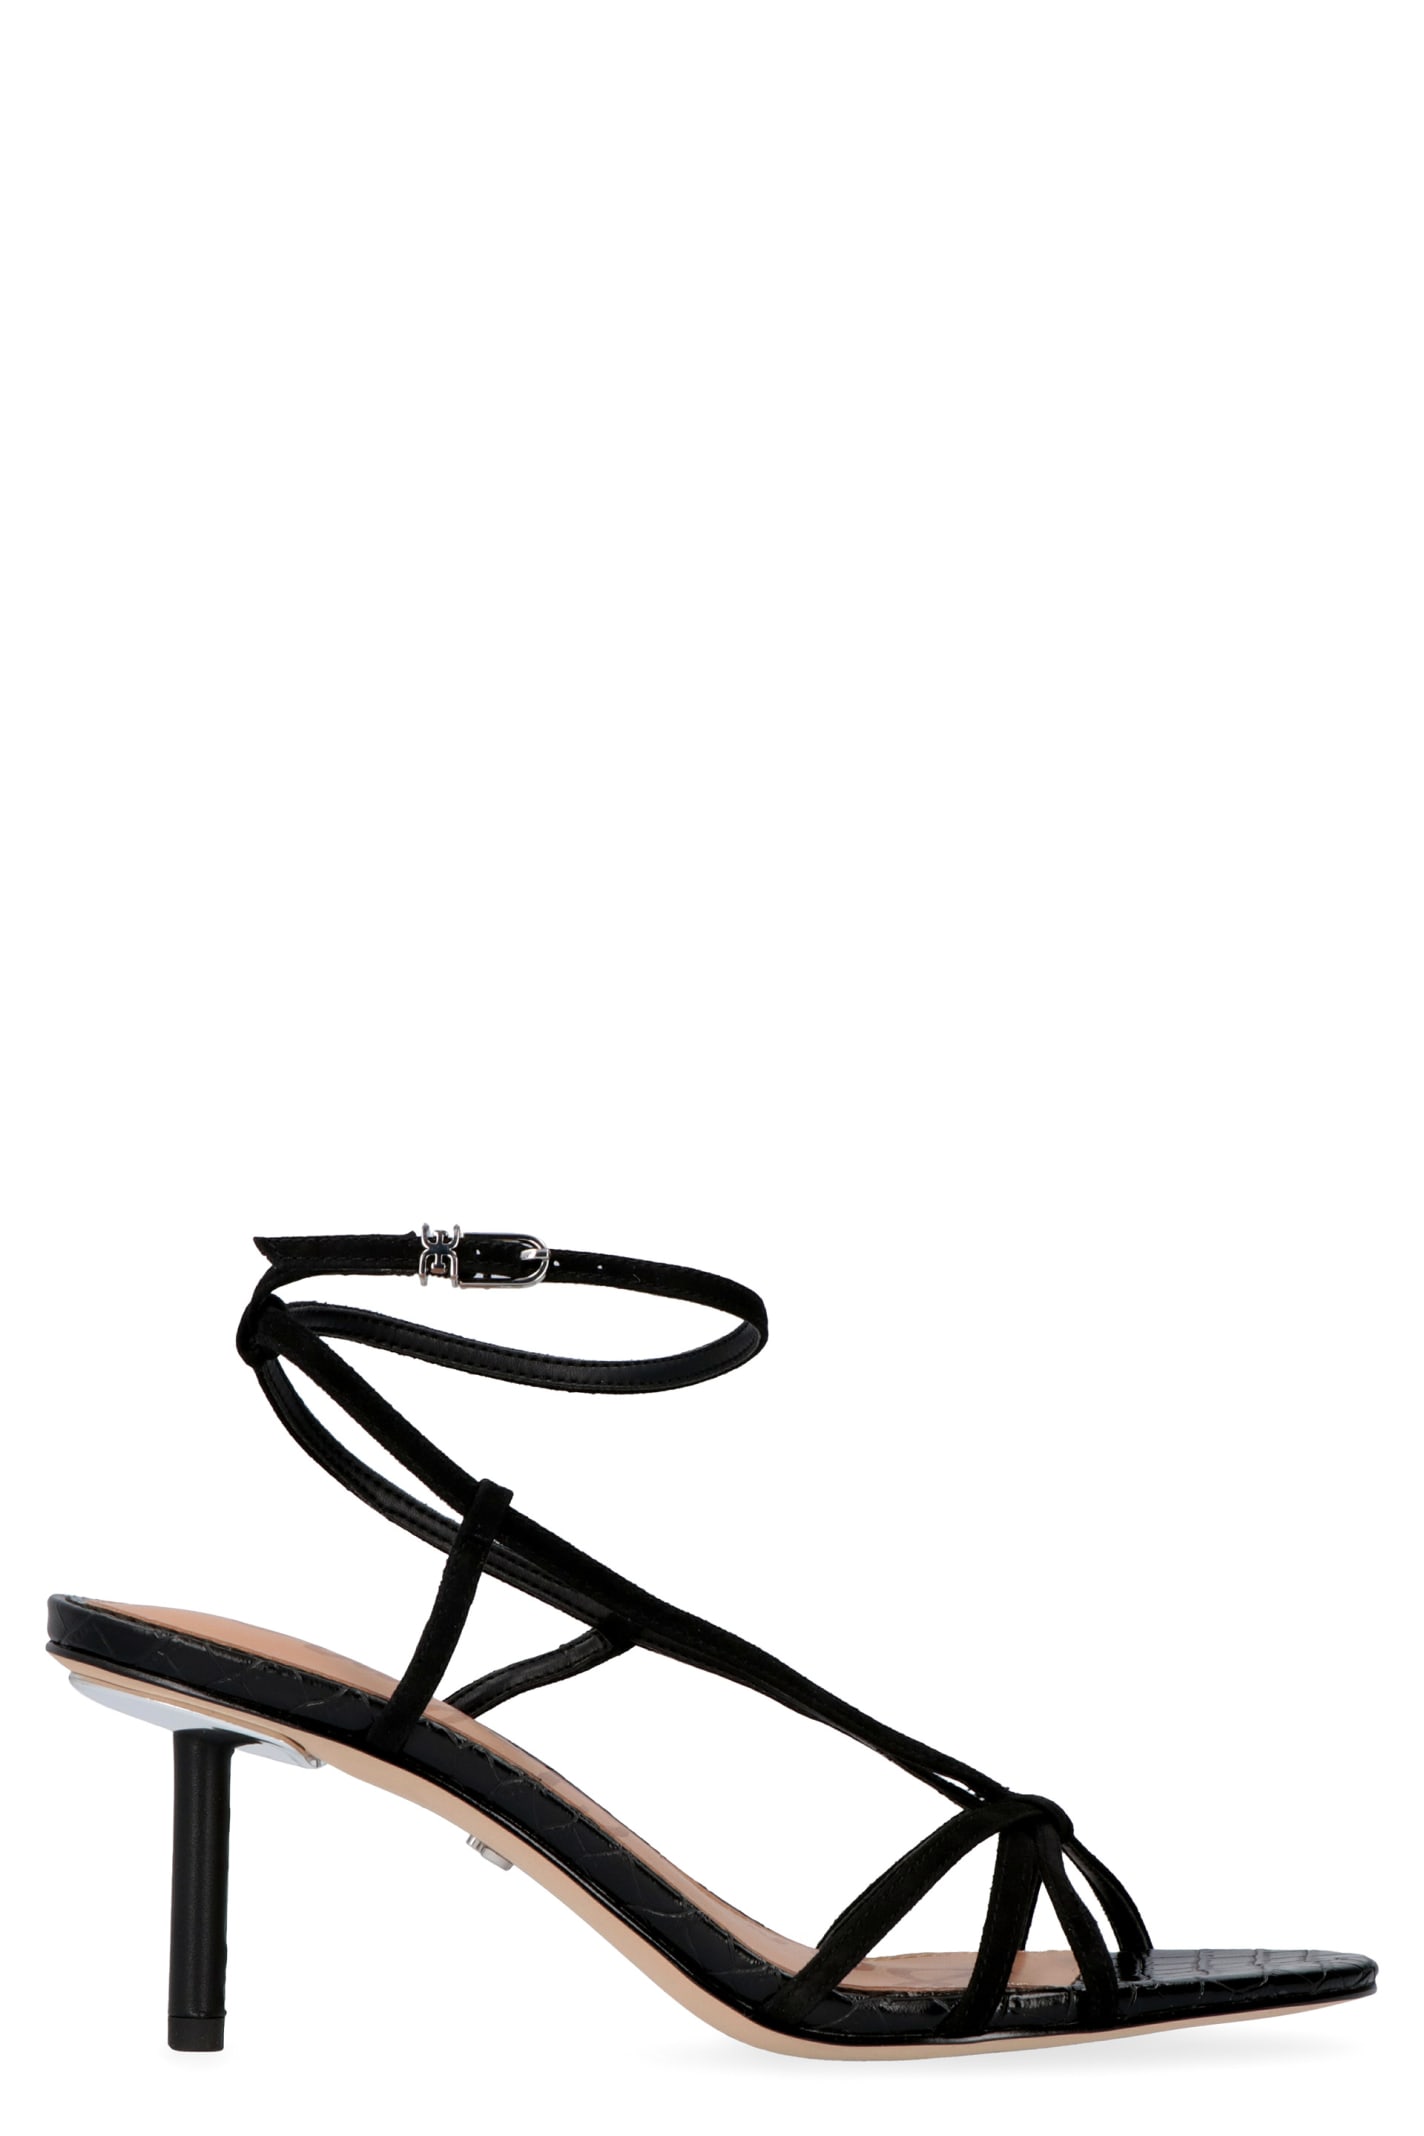 SAM EDELMAN PIPPA LEATHER AND SUEDE SANDALS WITH HEEL,11319232